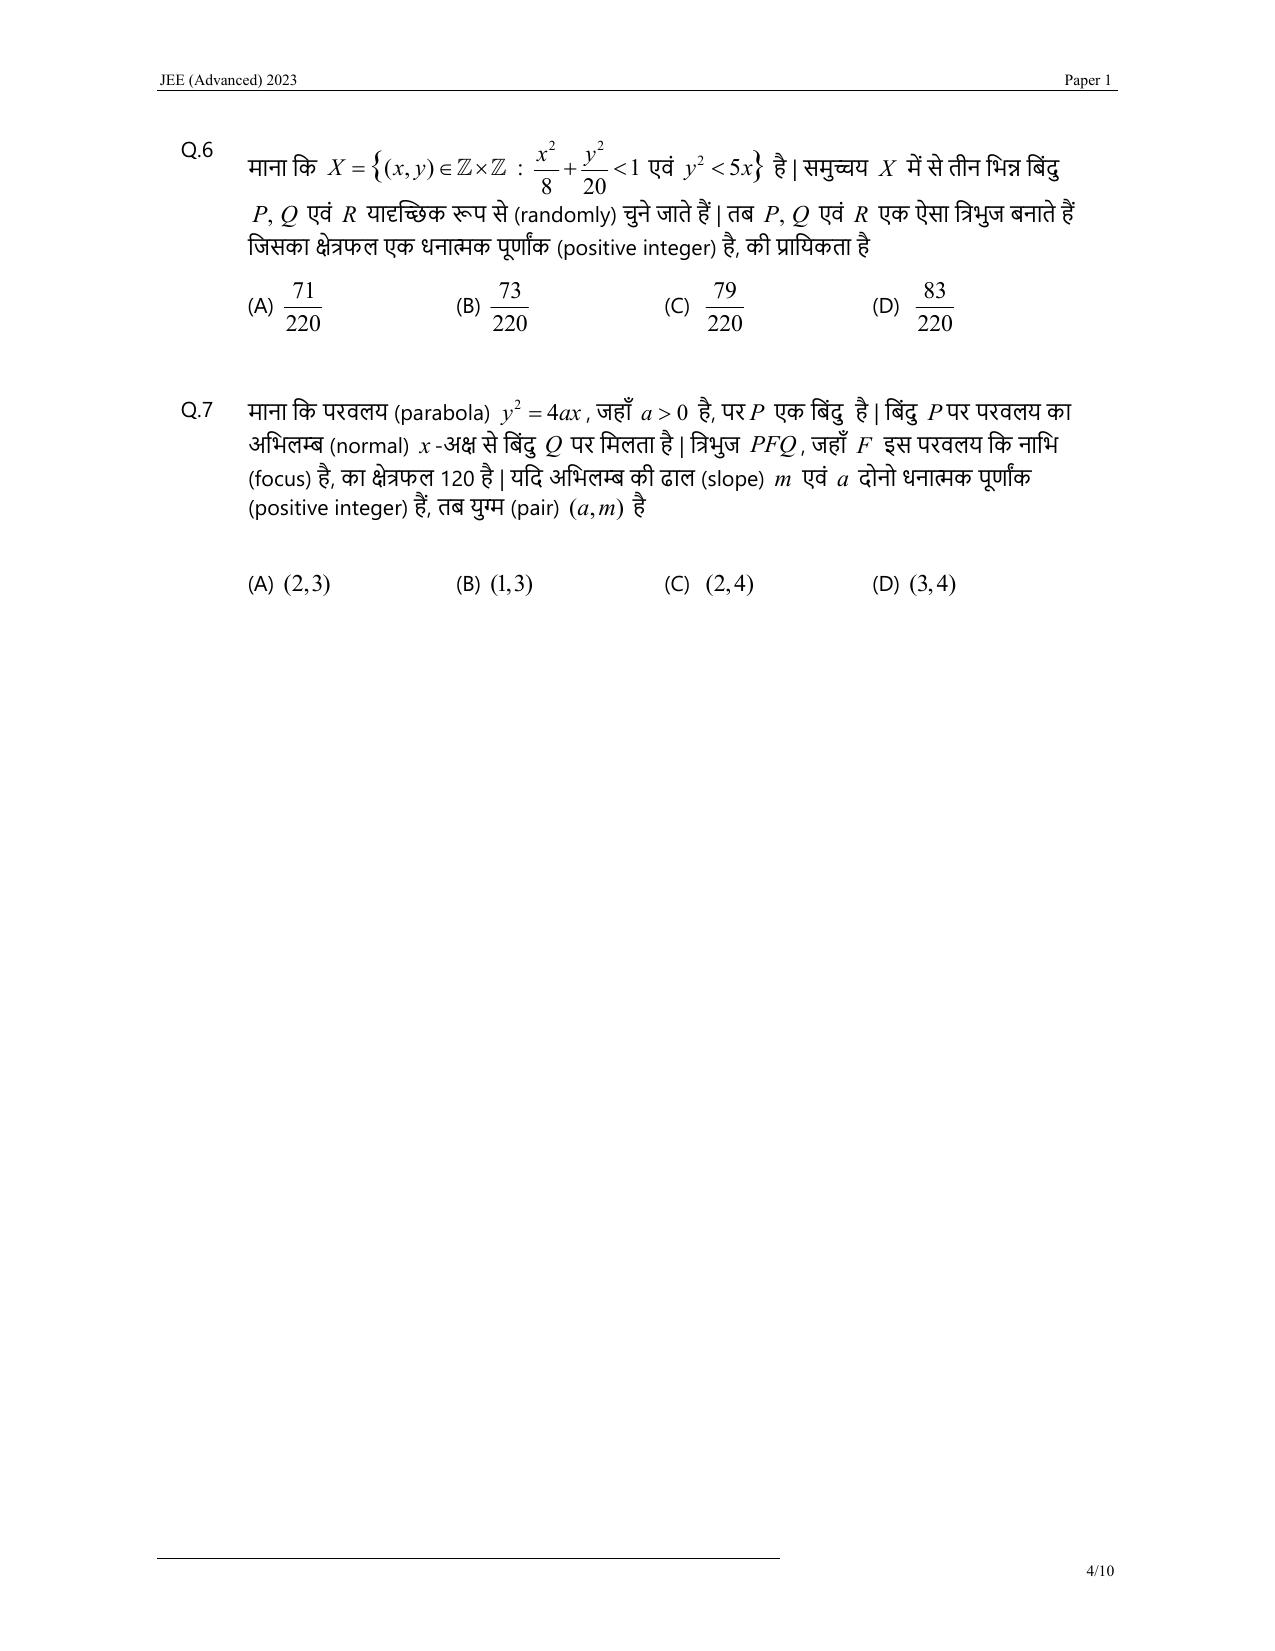 JEE Advanced 2023 Question Paper 1 (Hindi) - Page 4